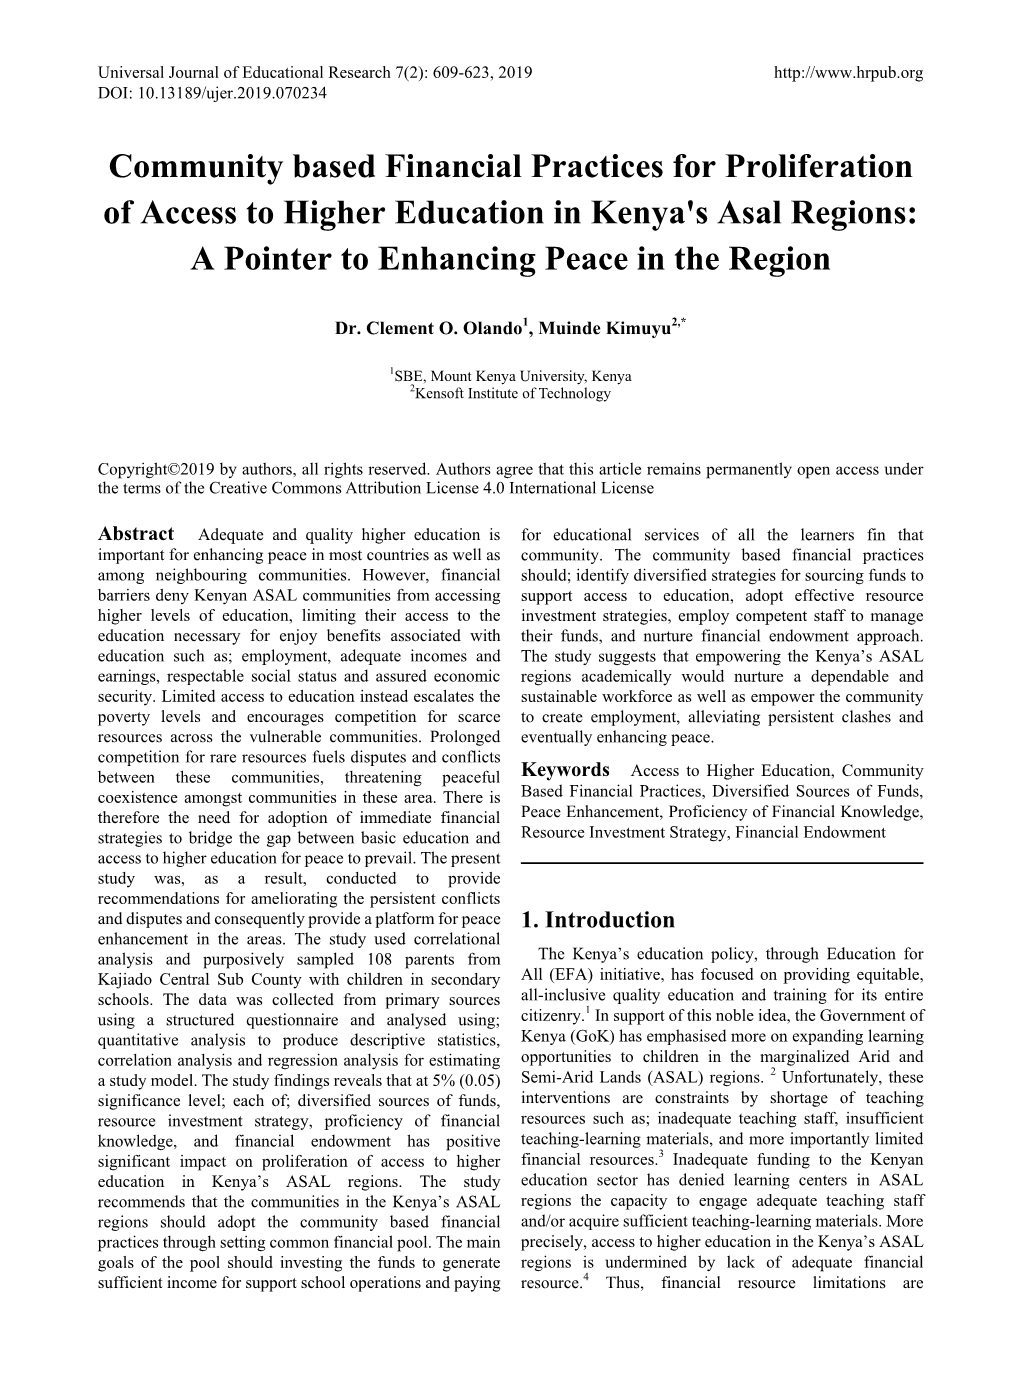 Community Based Financial Practices for Proliferation of Access to Higher Education in Kenya's Asal Regions: a Pointer to Enhancing Peace in the Region